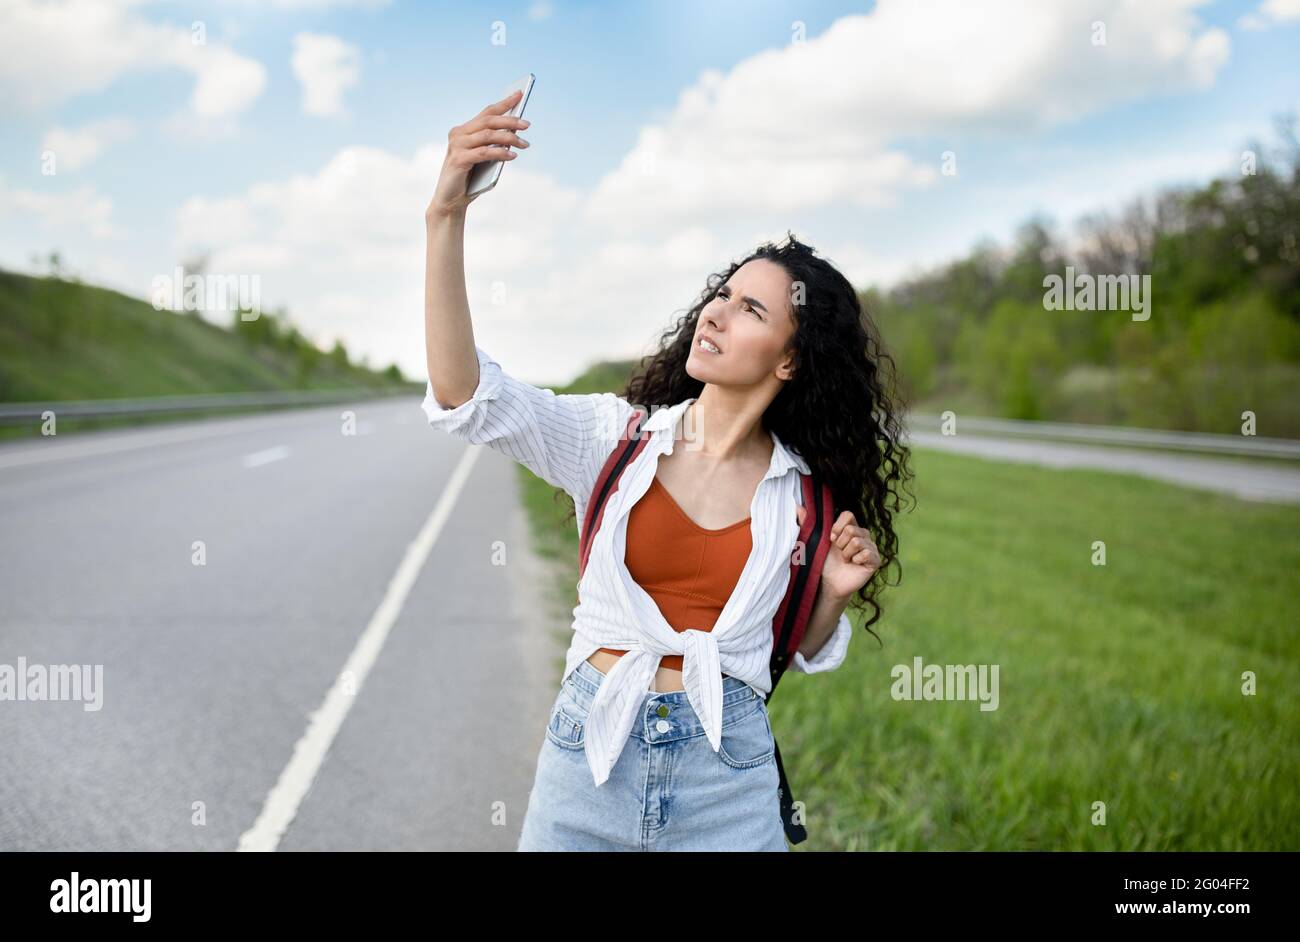 Upset young woman walking along road, raising hand with smartphone, looking for signal, having no connection, outdoors Stock Photo